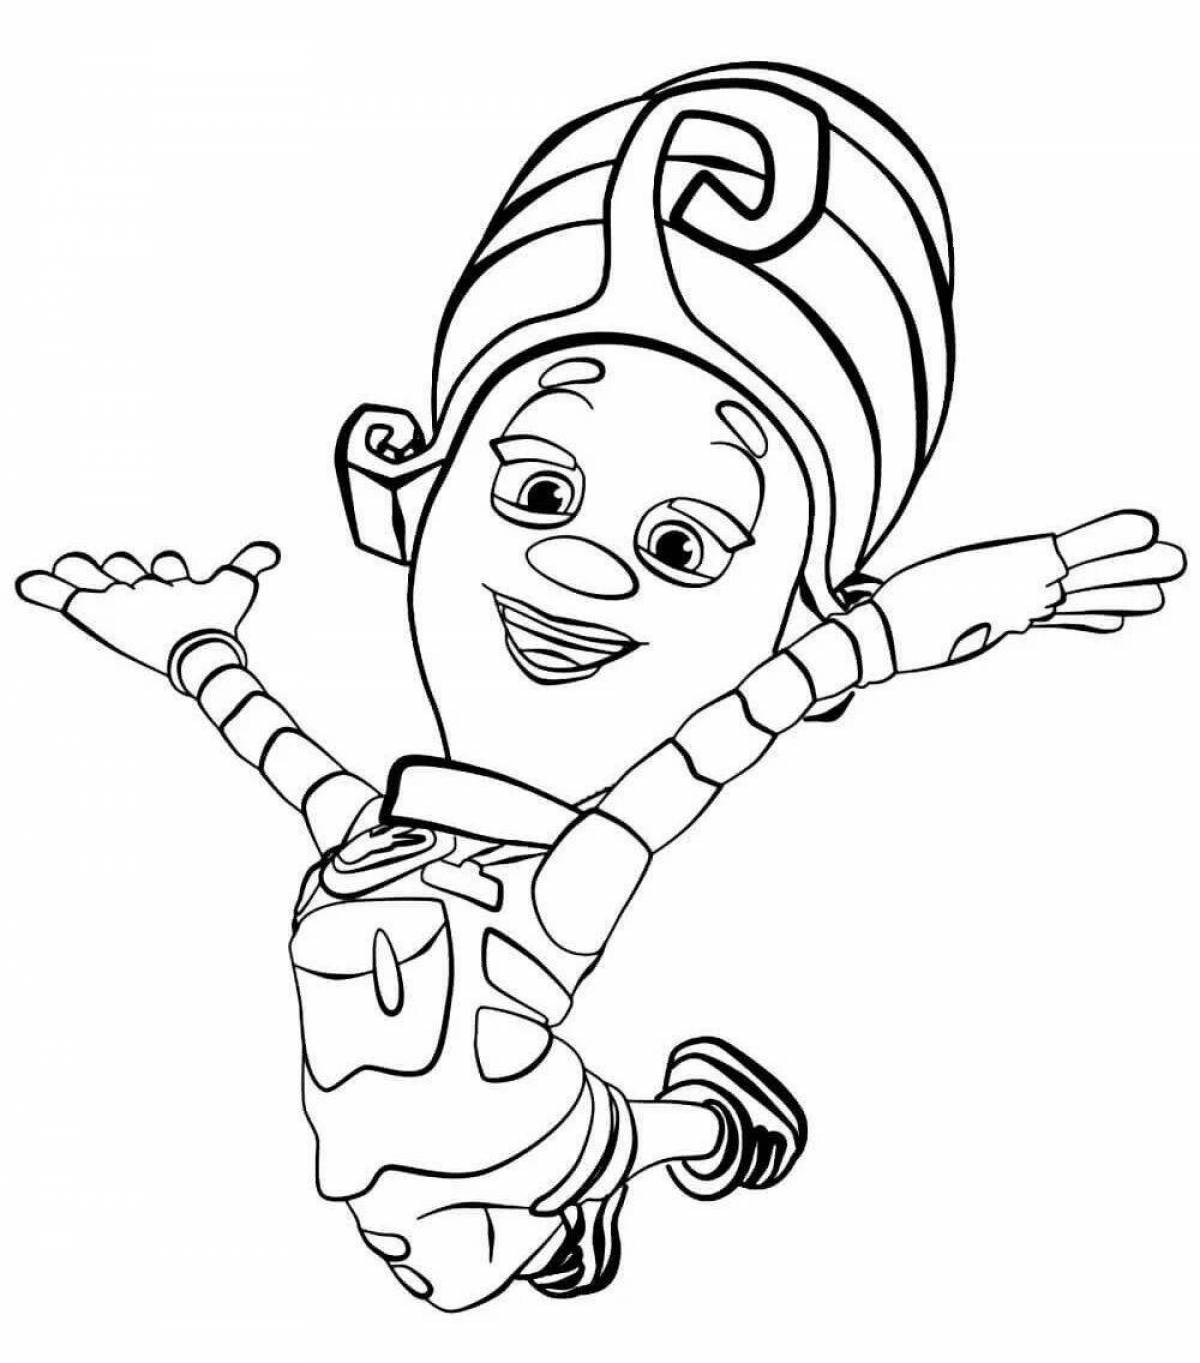 Playtime coloring page